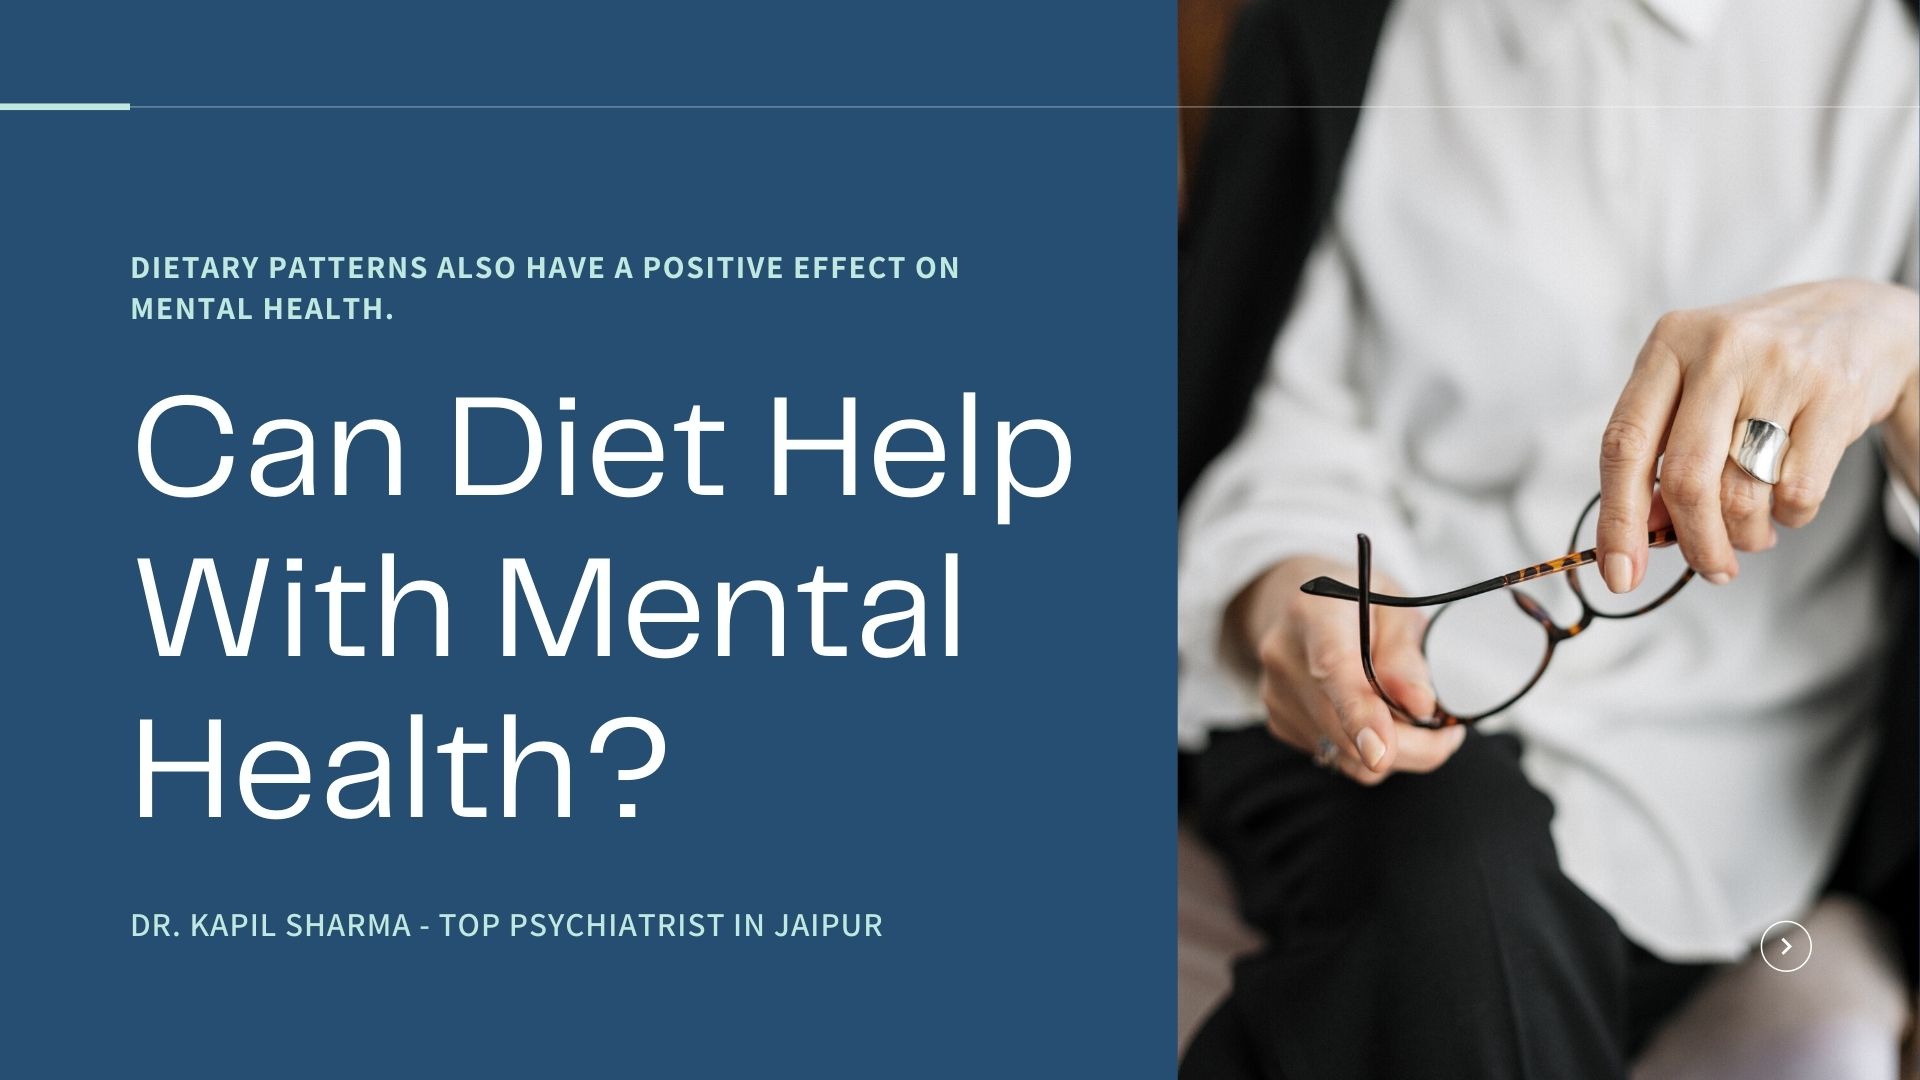 Can Diet Help With Mental Health?